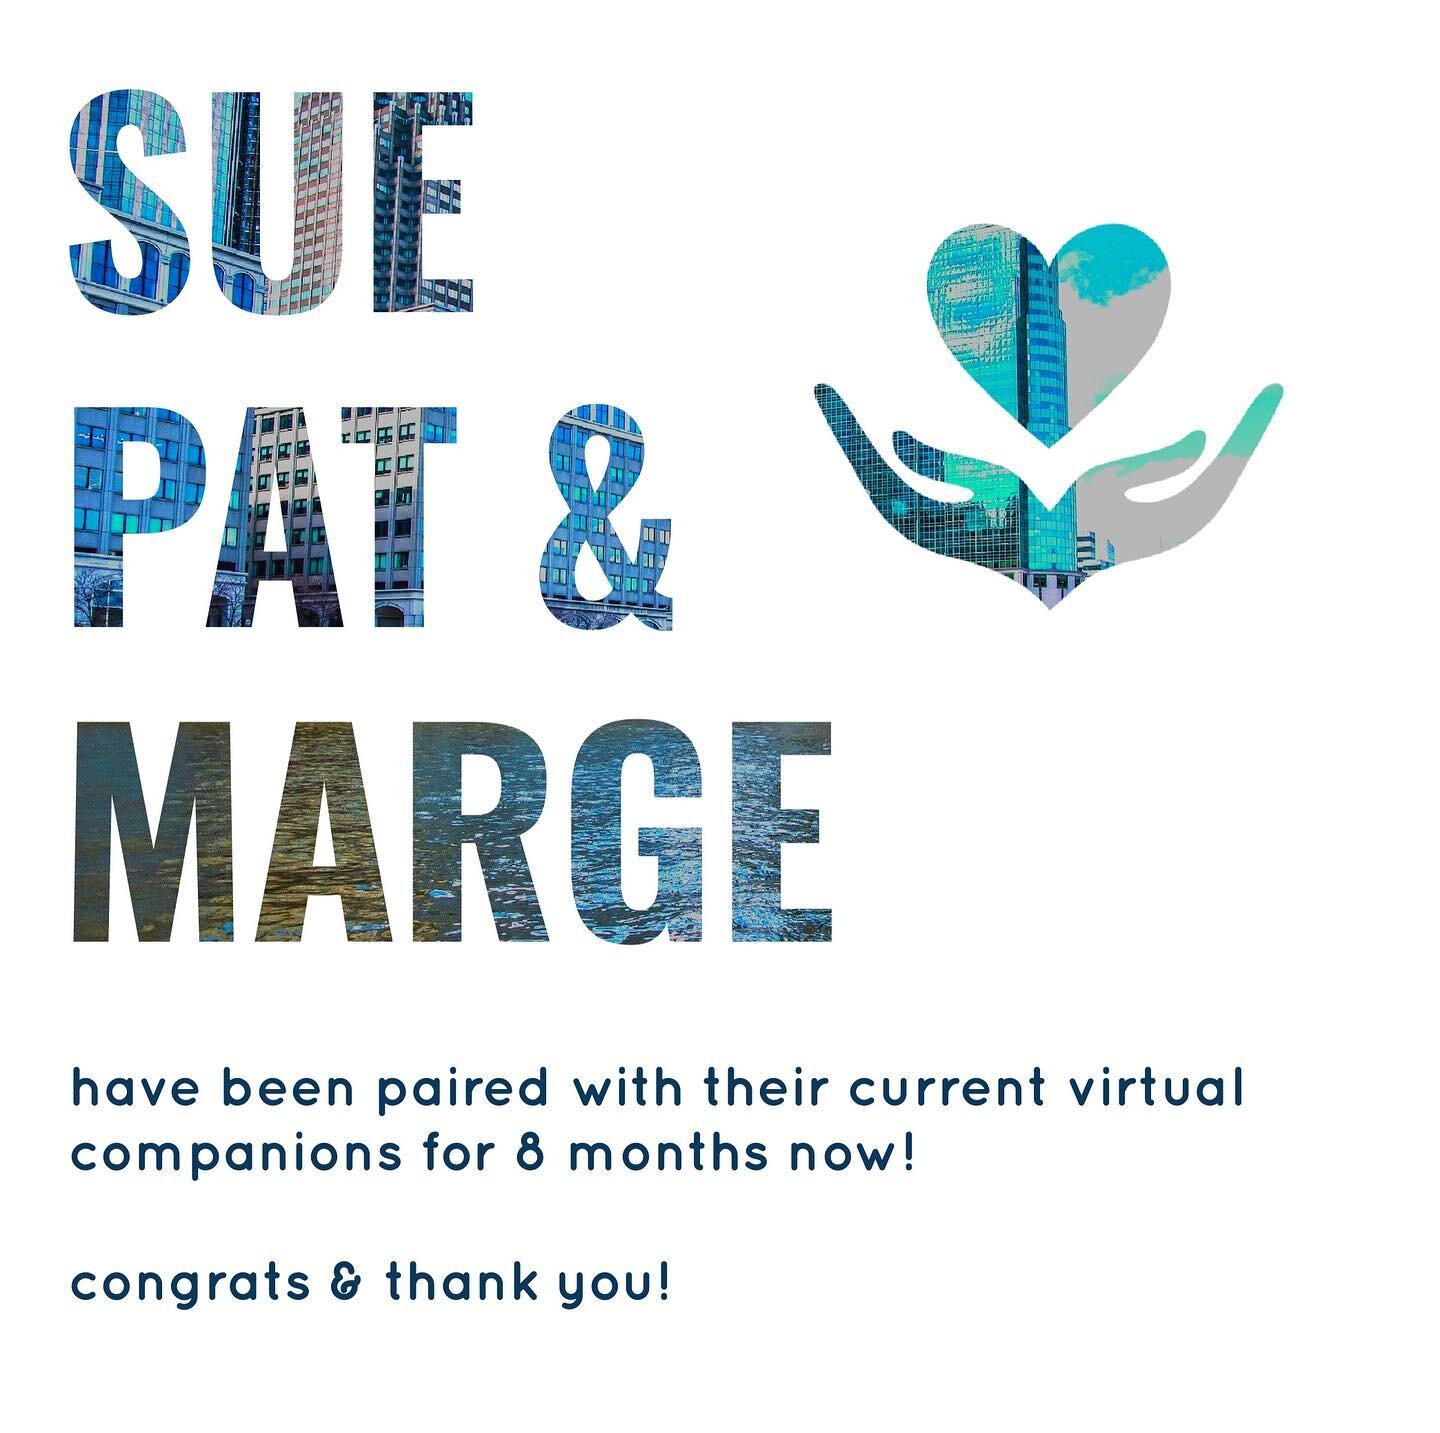 Our volunteers are so incredibly committed. Congratulations to Sue, Pat, and Marge on 8 months of virtual companionship!